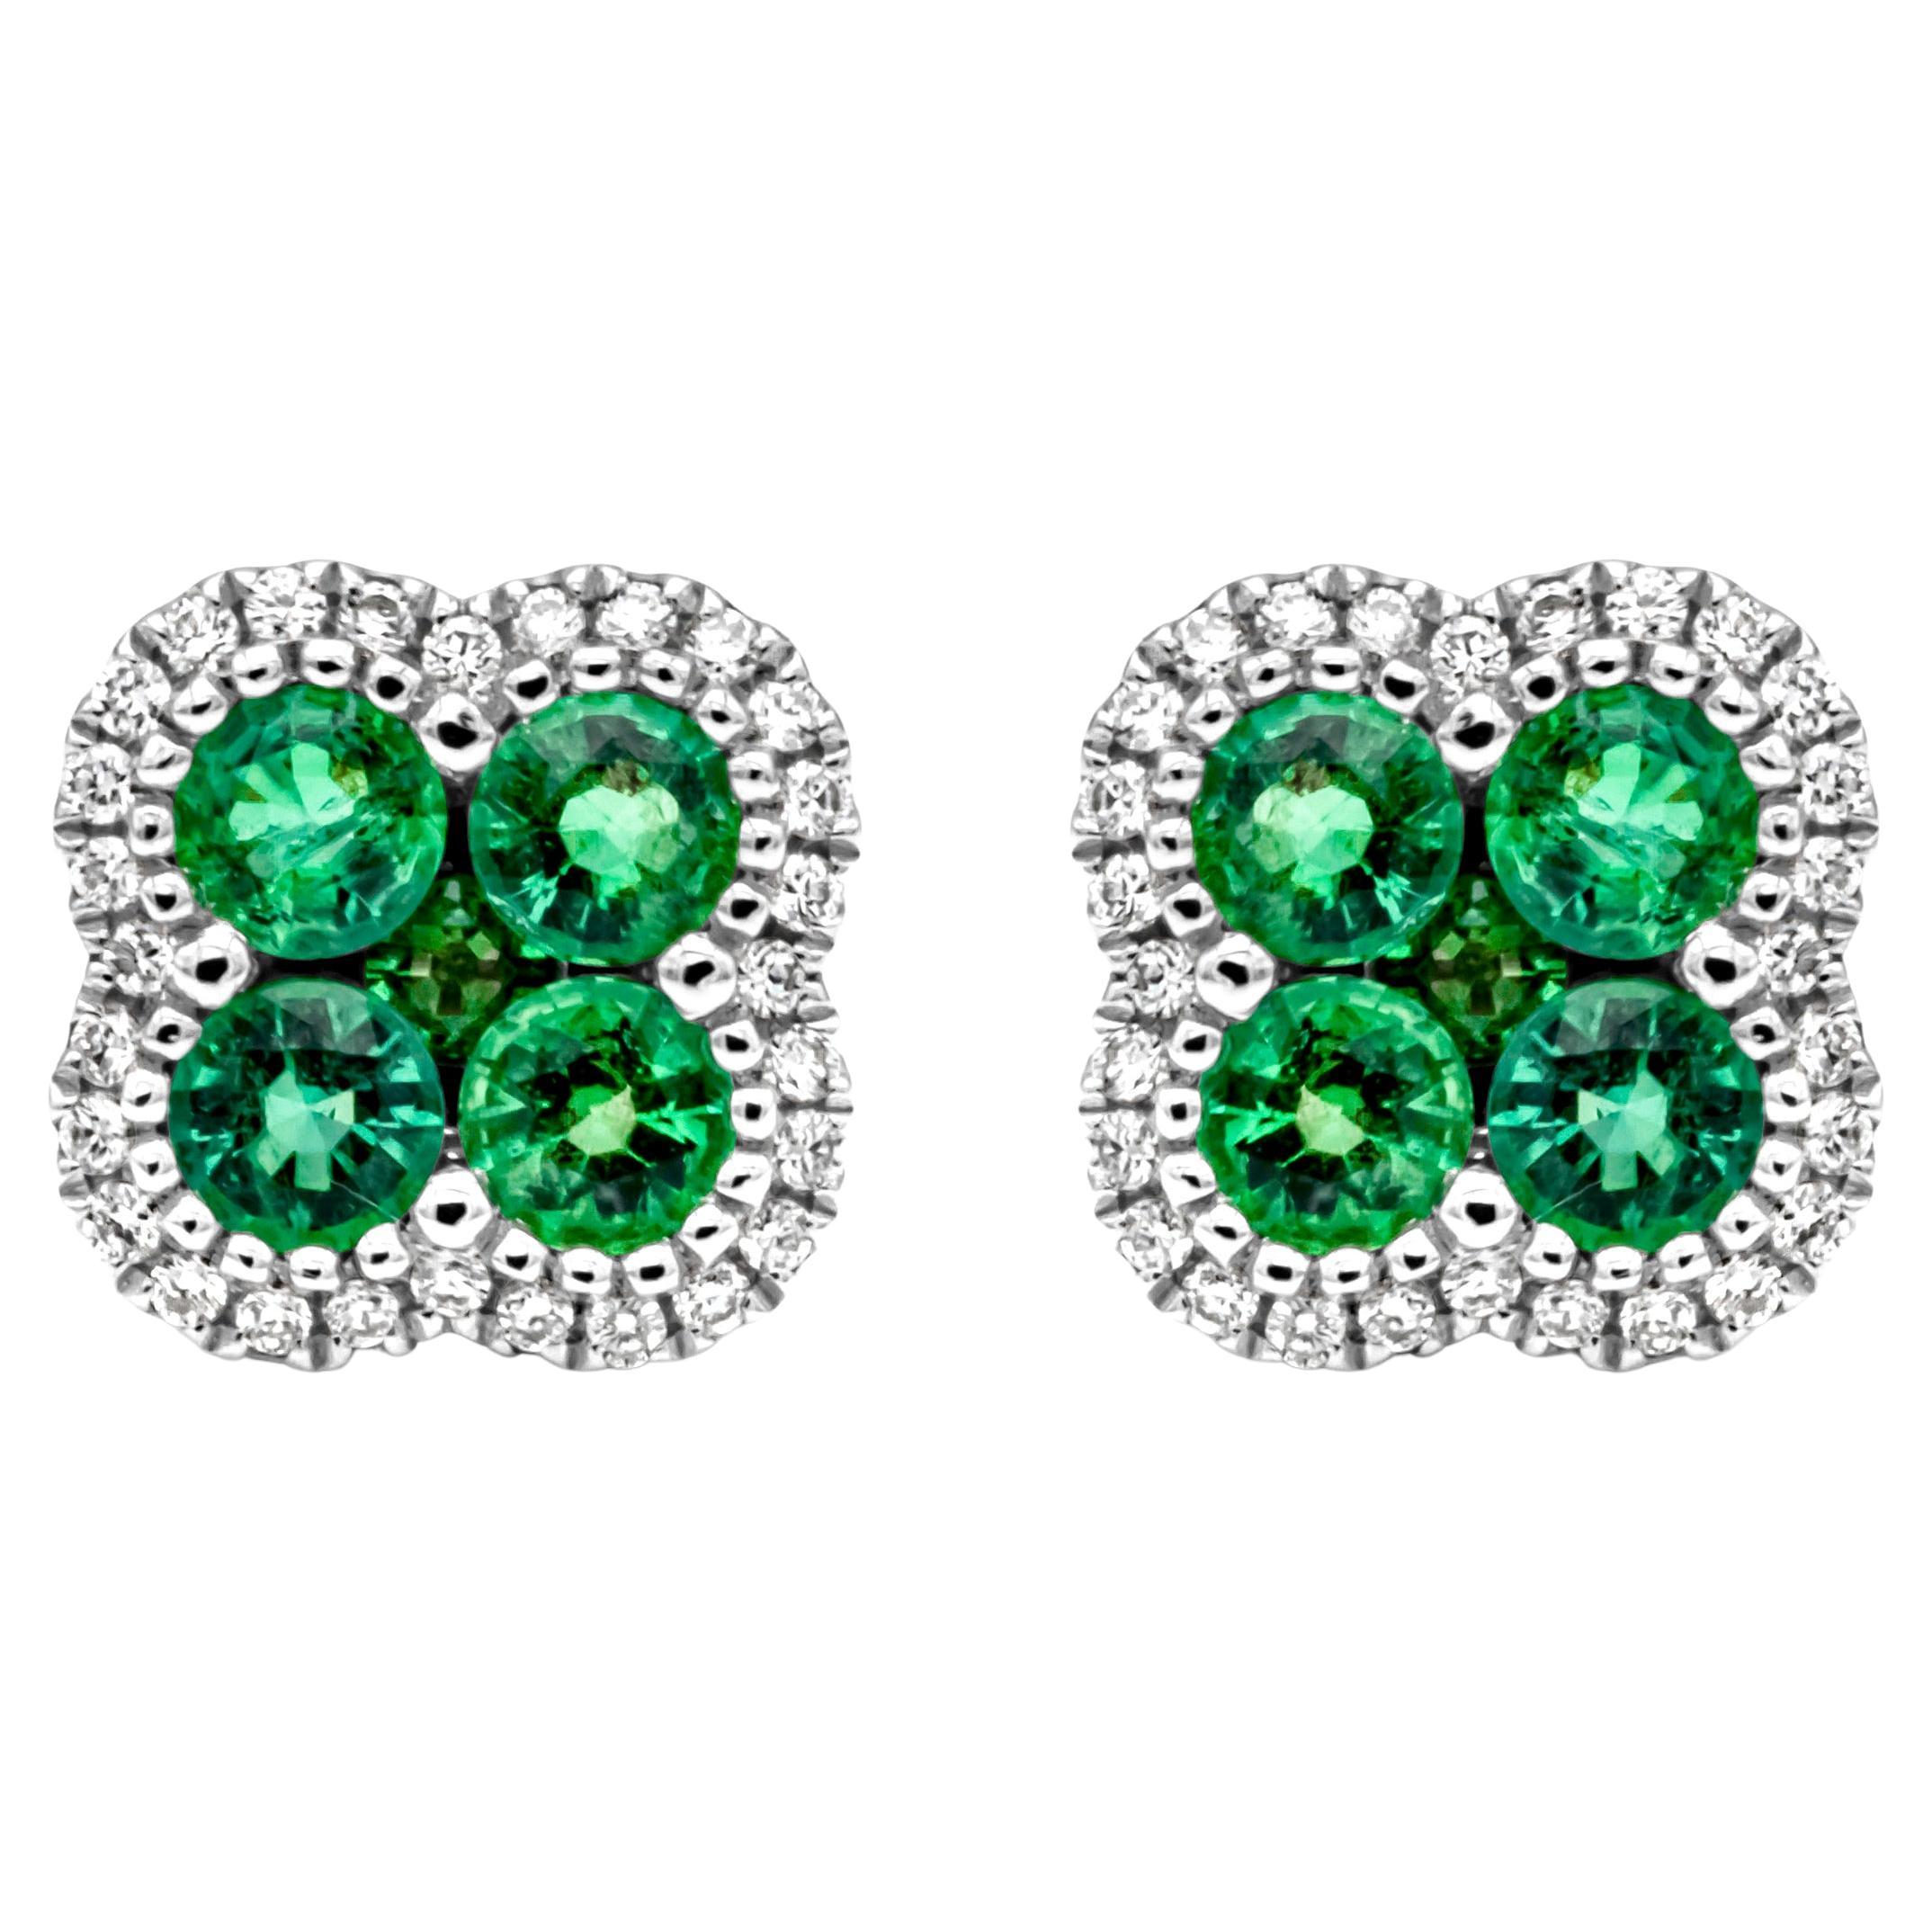 1.05 Carats Total Colombian Green Emerald & Round Diamond Halo Stud Earrings For Sale